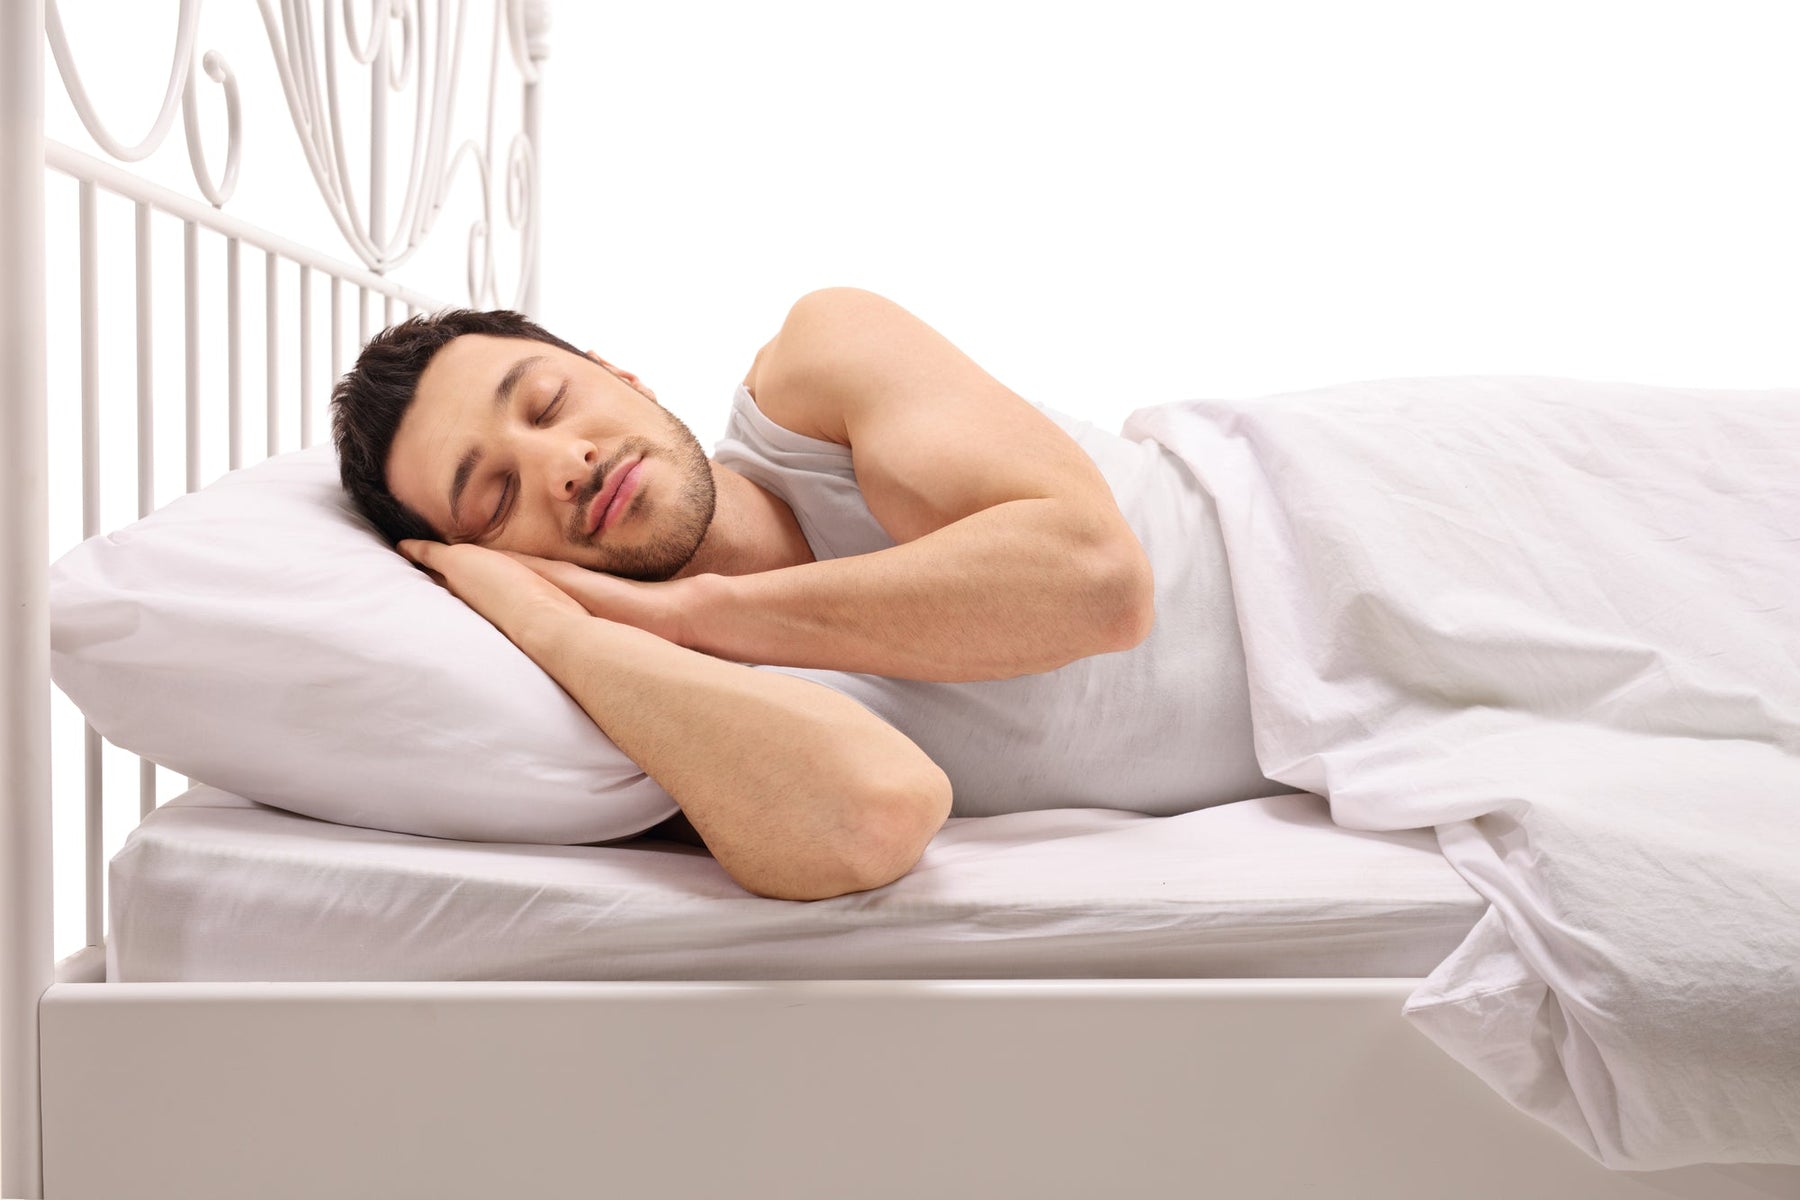 What Mattress is Good for Back Pain?